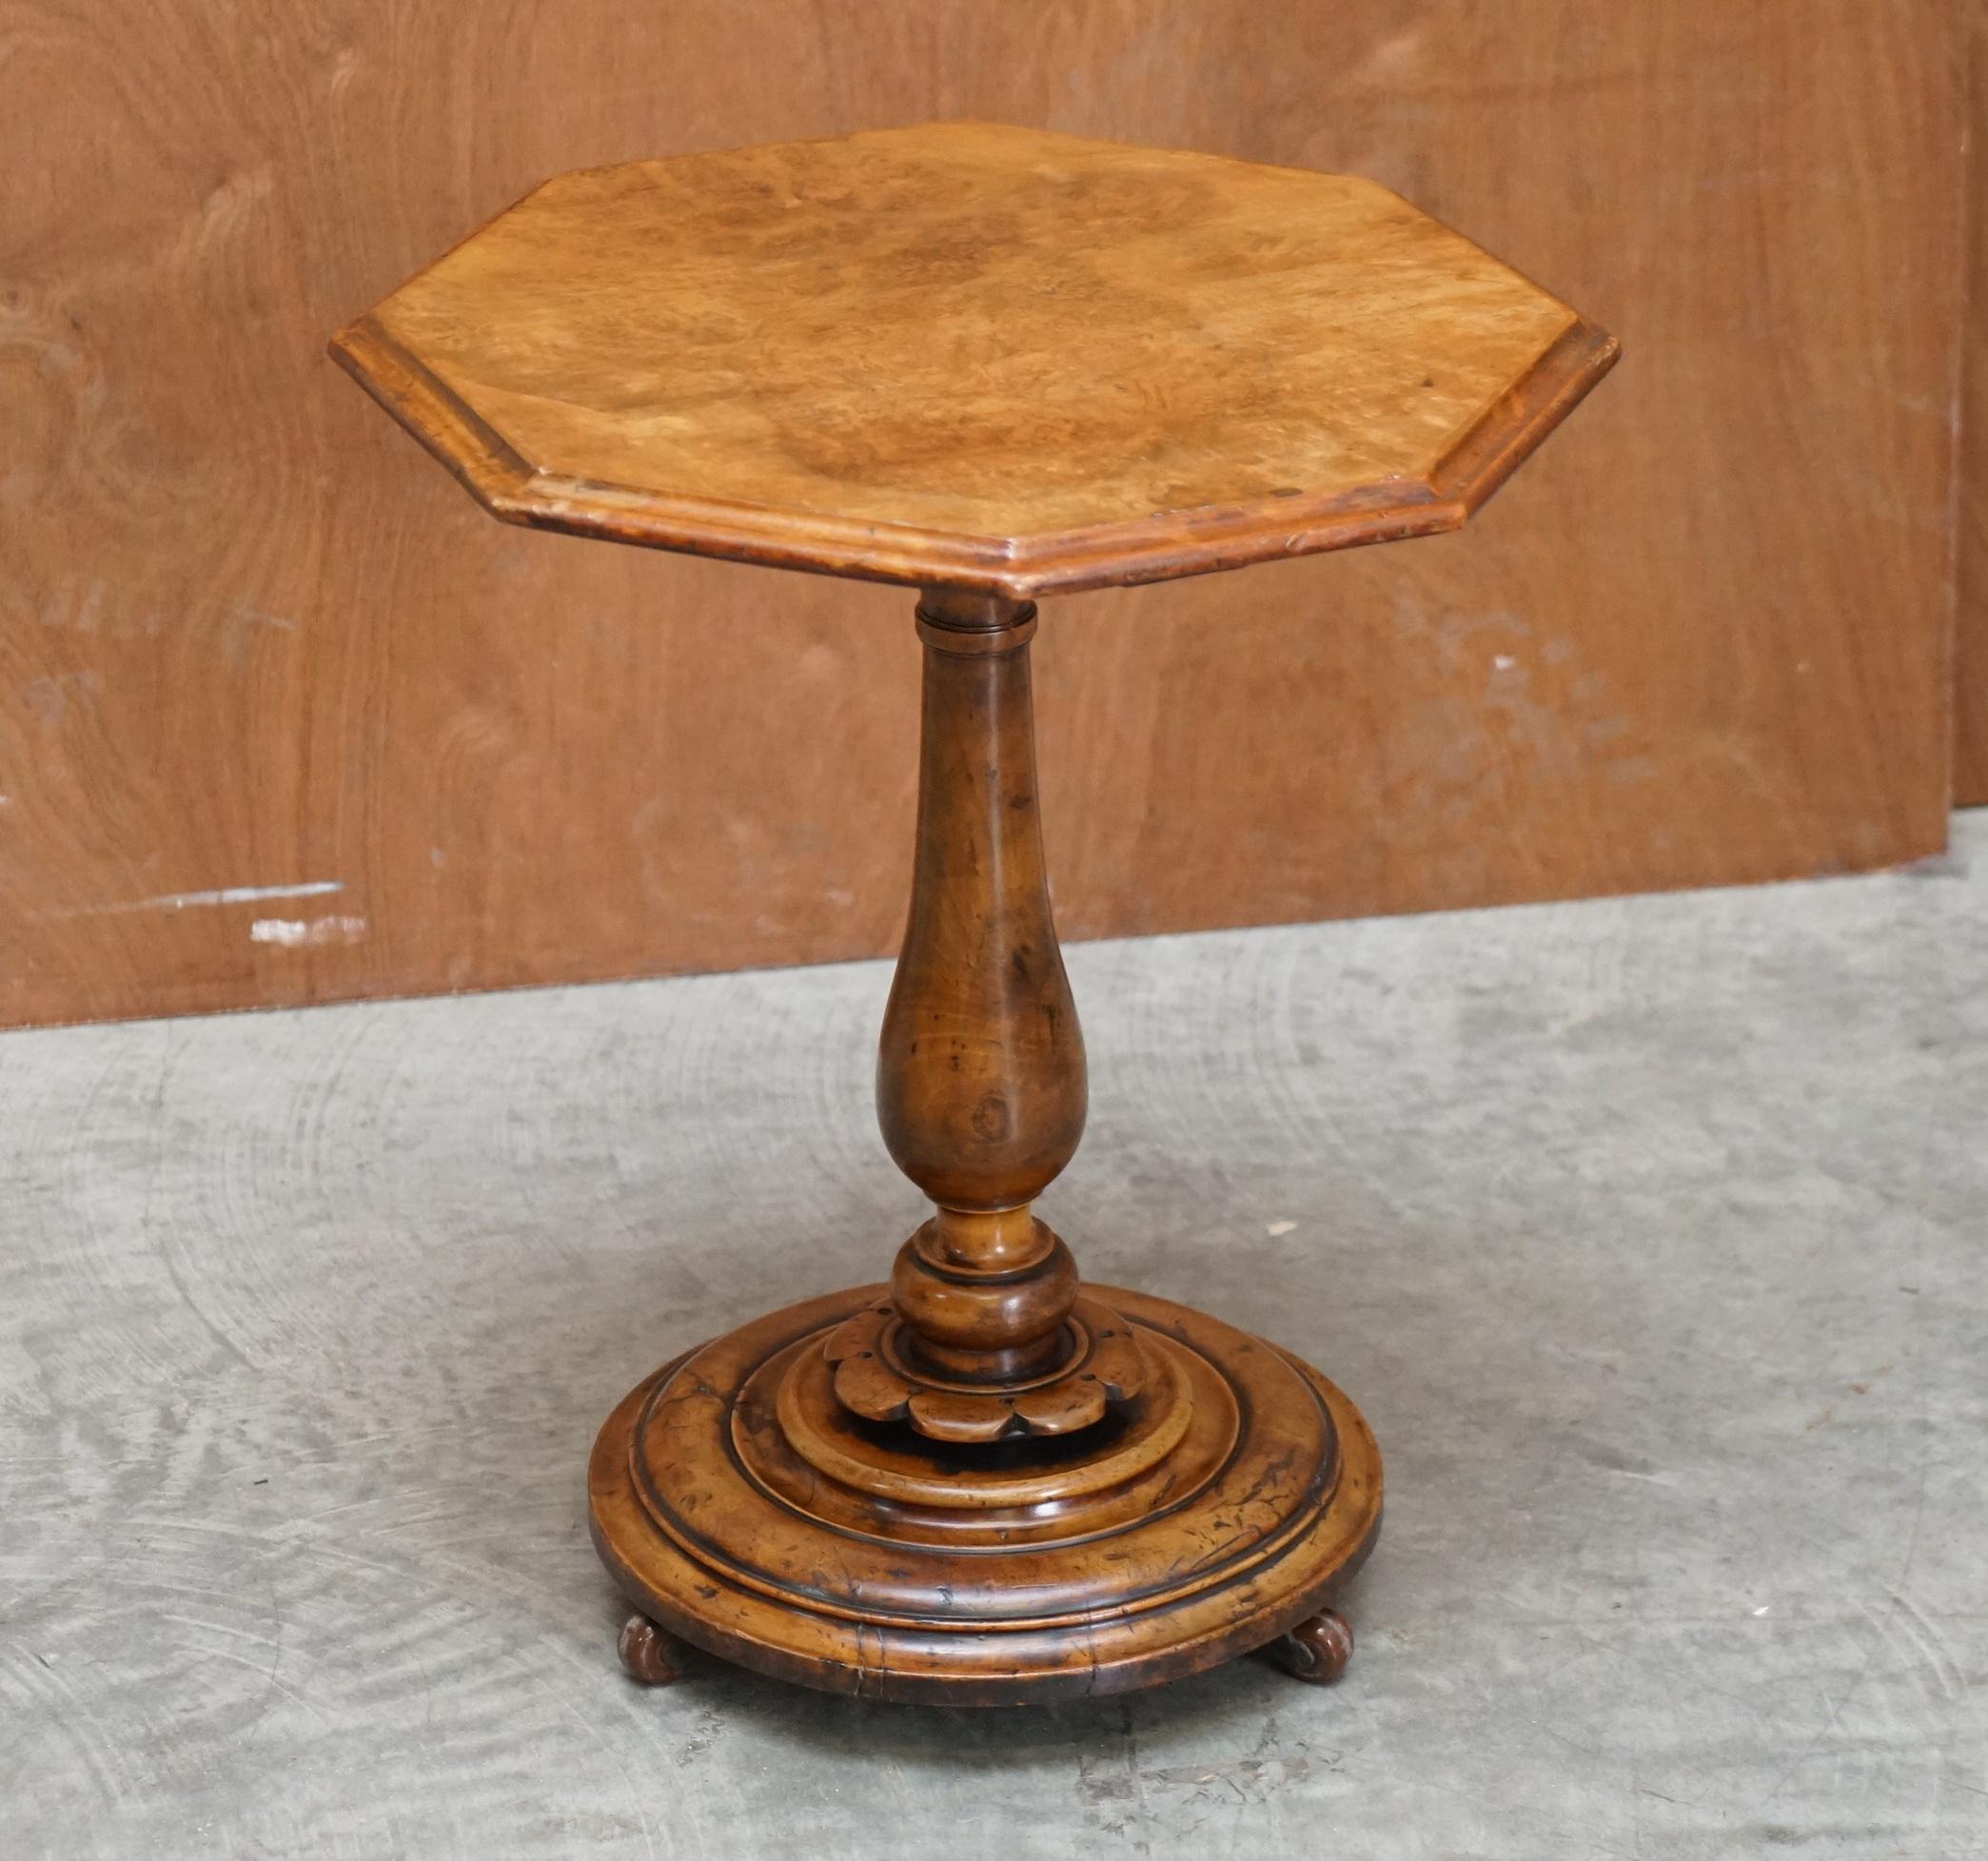 We are delighted to offer for sale this lovely original Victorian Pollard oak side end lamp wine table with the most sublime patina I have ever seen!

What a table!!!! I mean what a table!!!!!!!! This thing is amazing, I absolutely love it, I